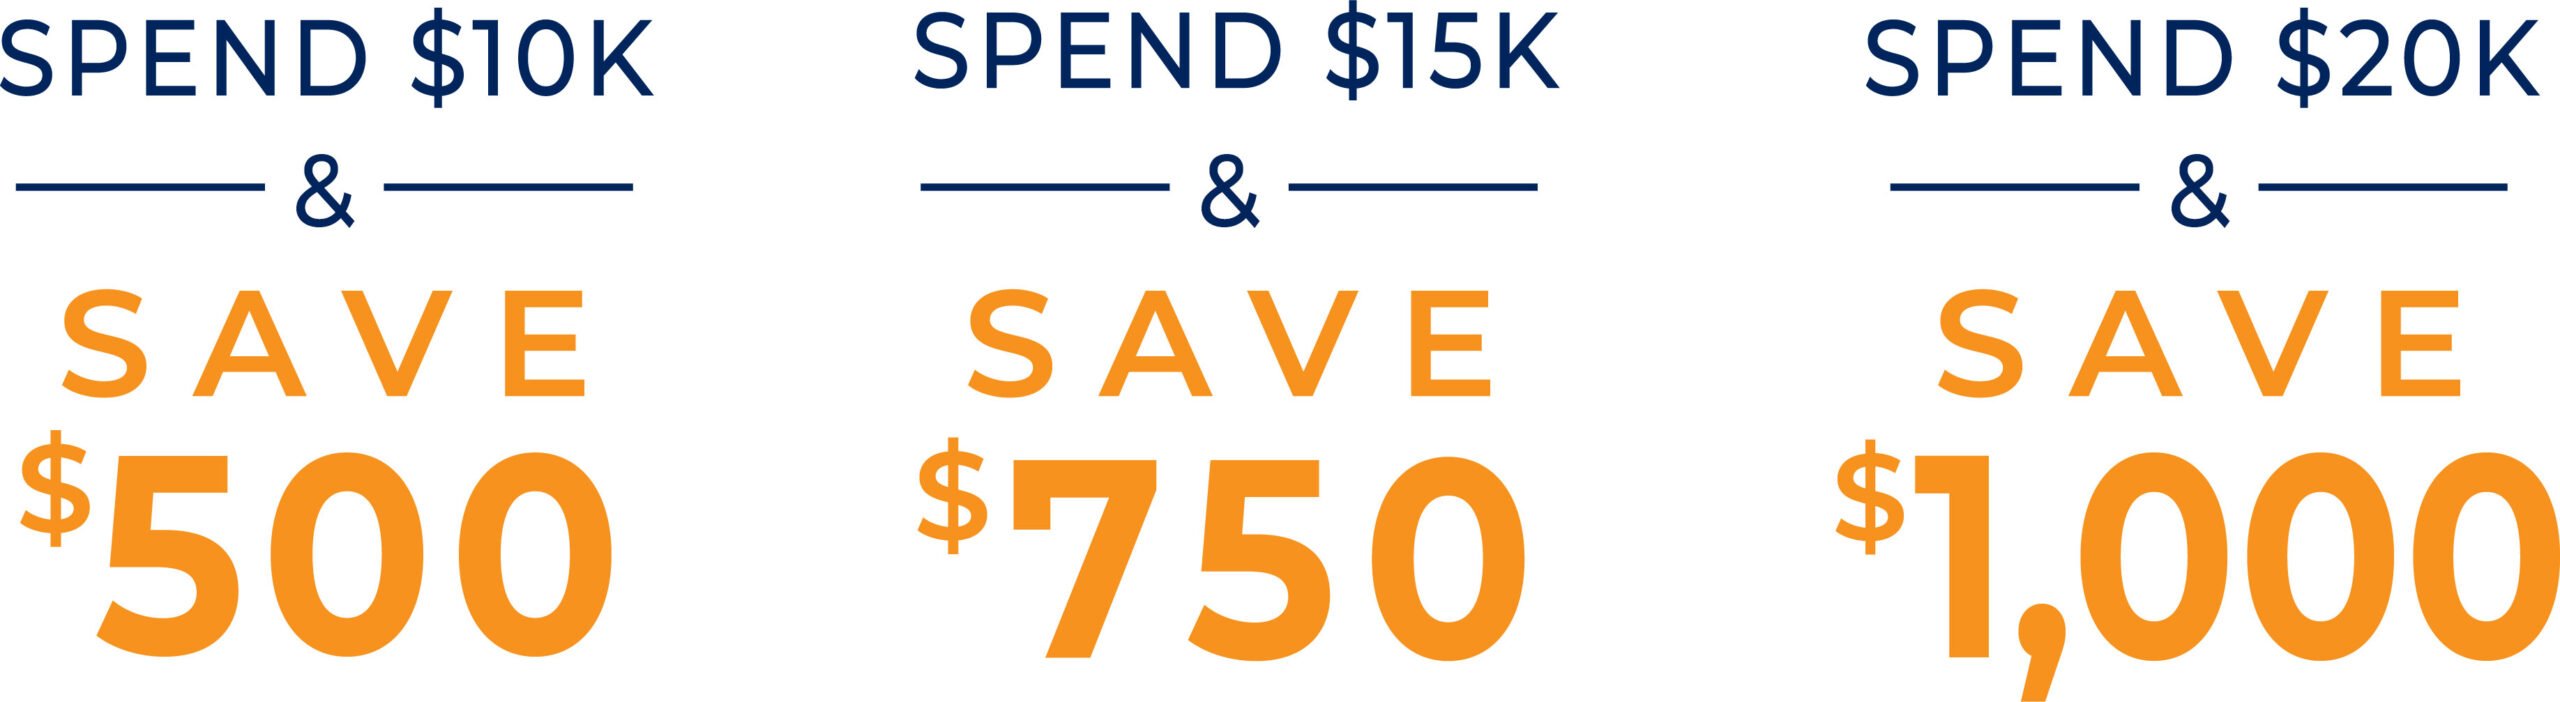 spend-save-graphic